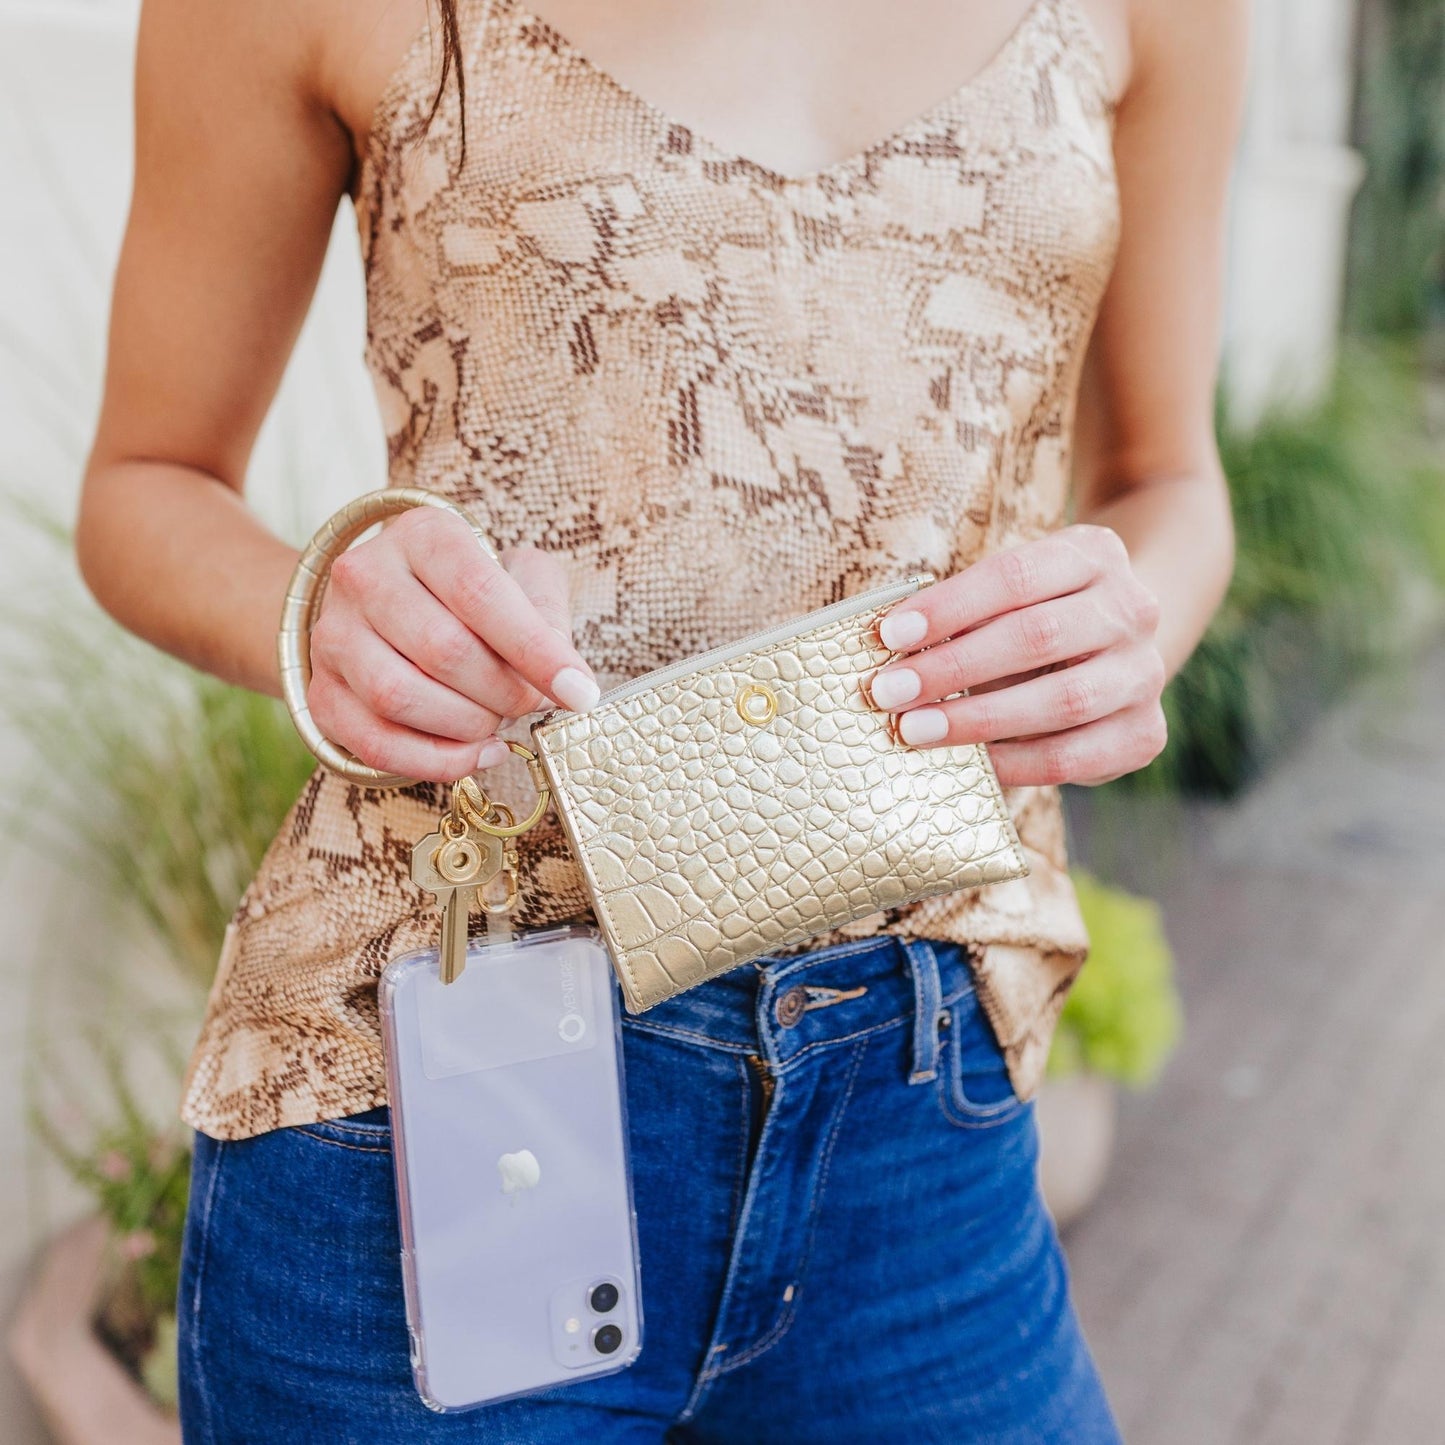 Gold wallet wristlet with phone holder for organization shown with key ring bracelet and phone case attached.